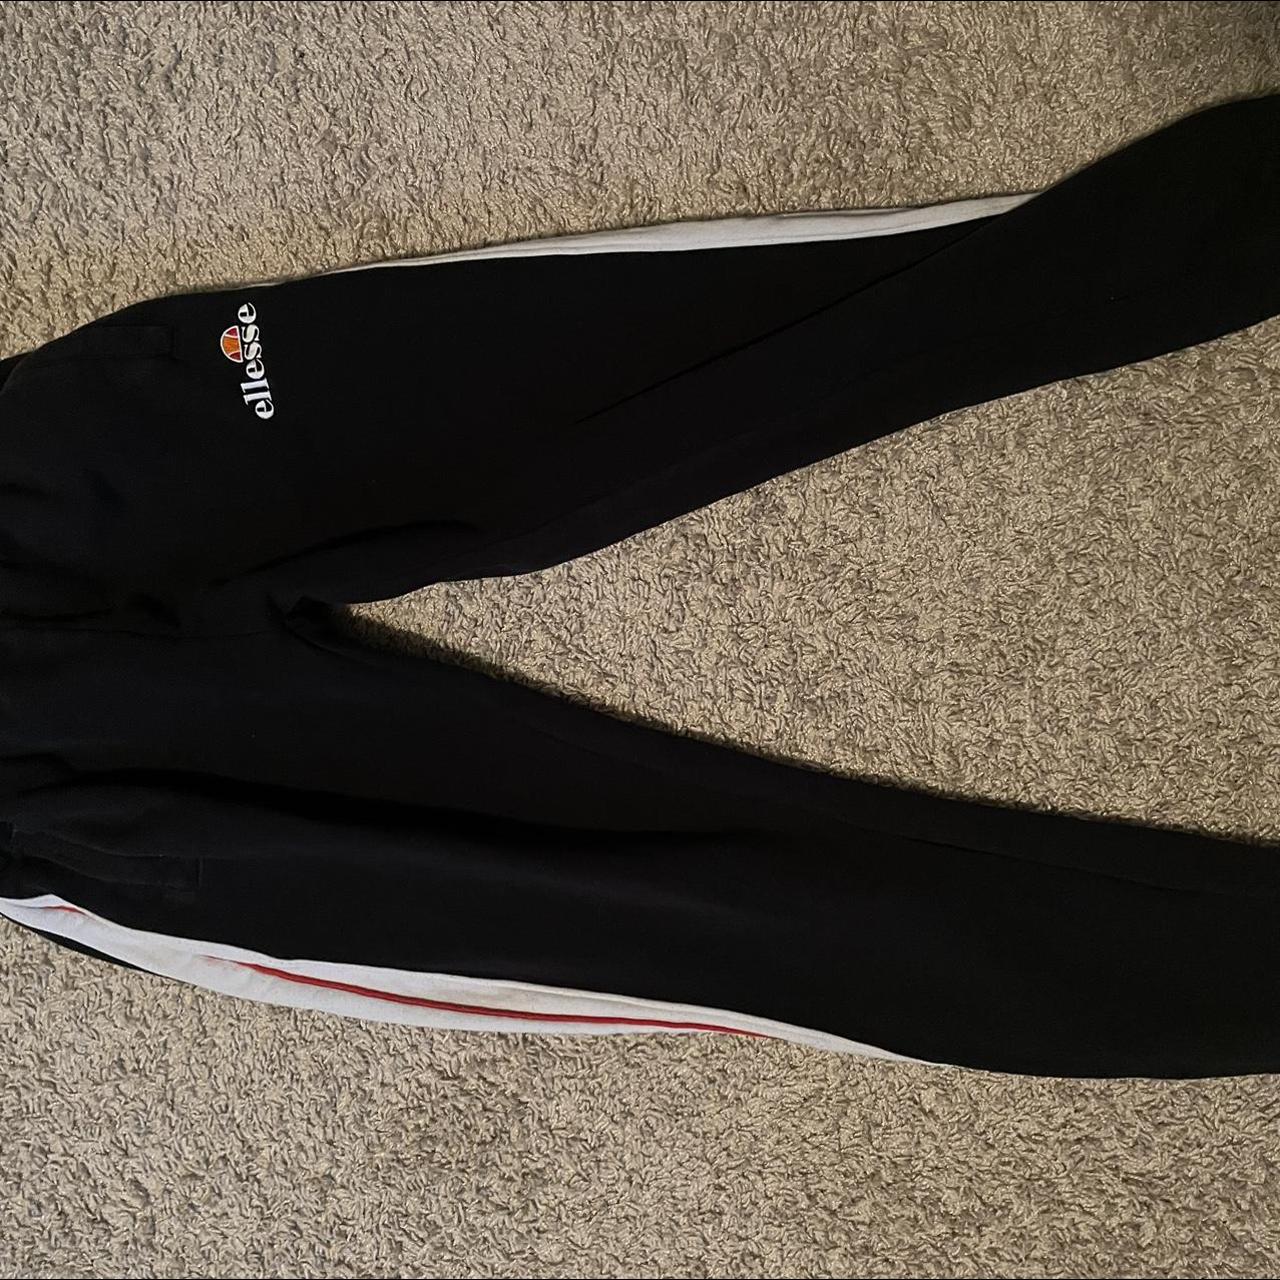 Ellesse Men's Black and White Joggers-tracksuits